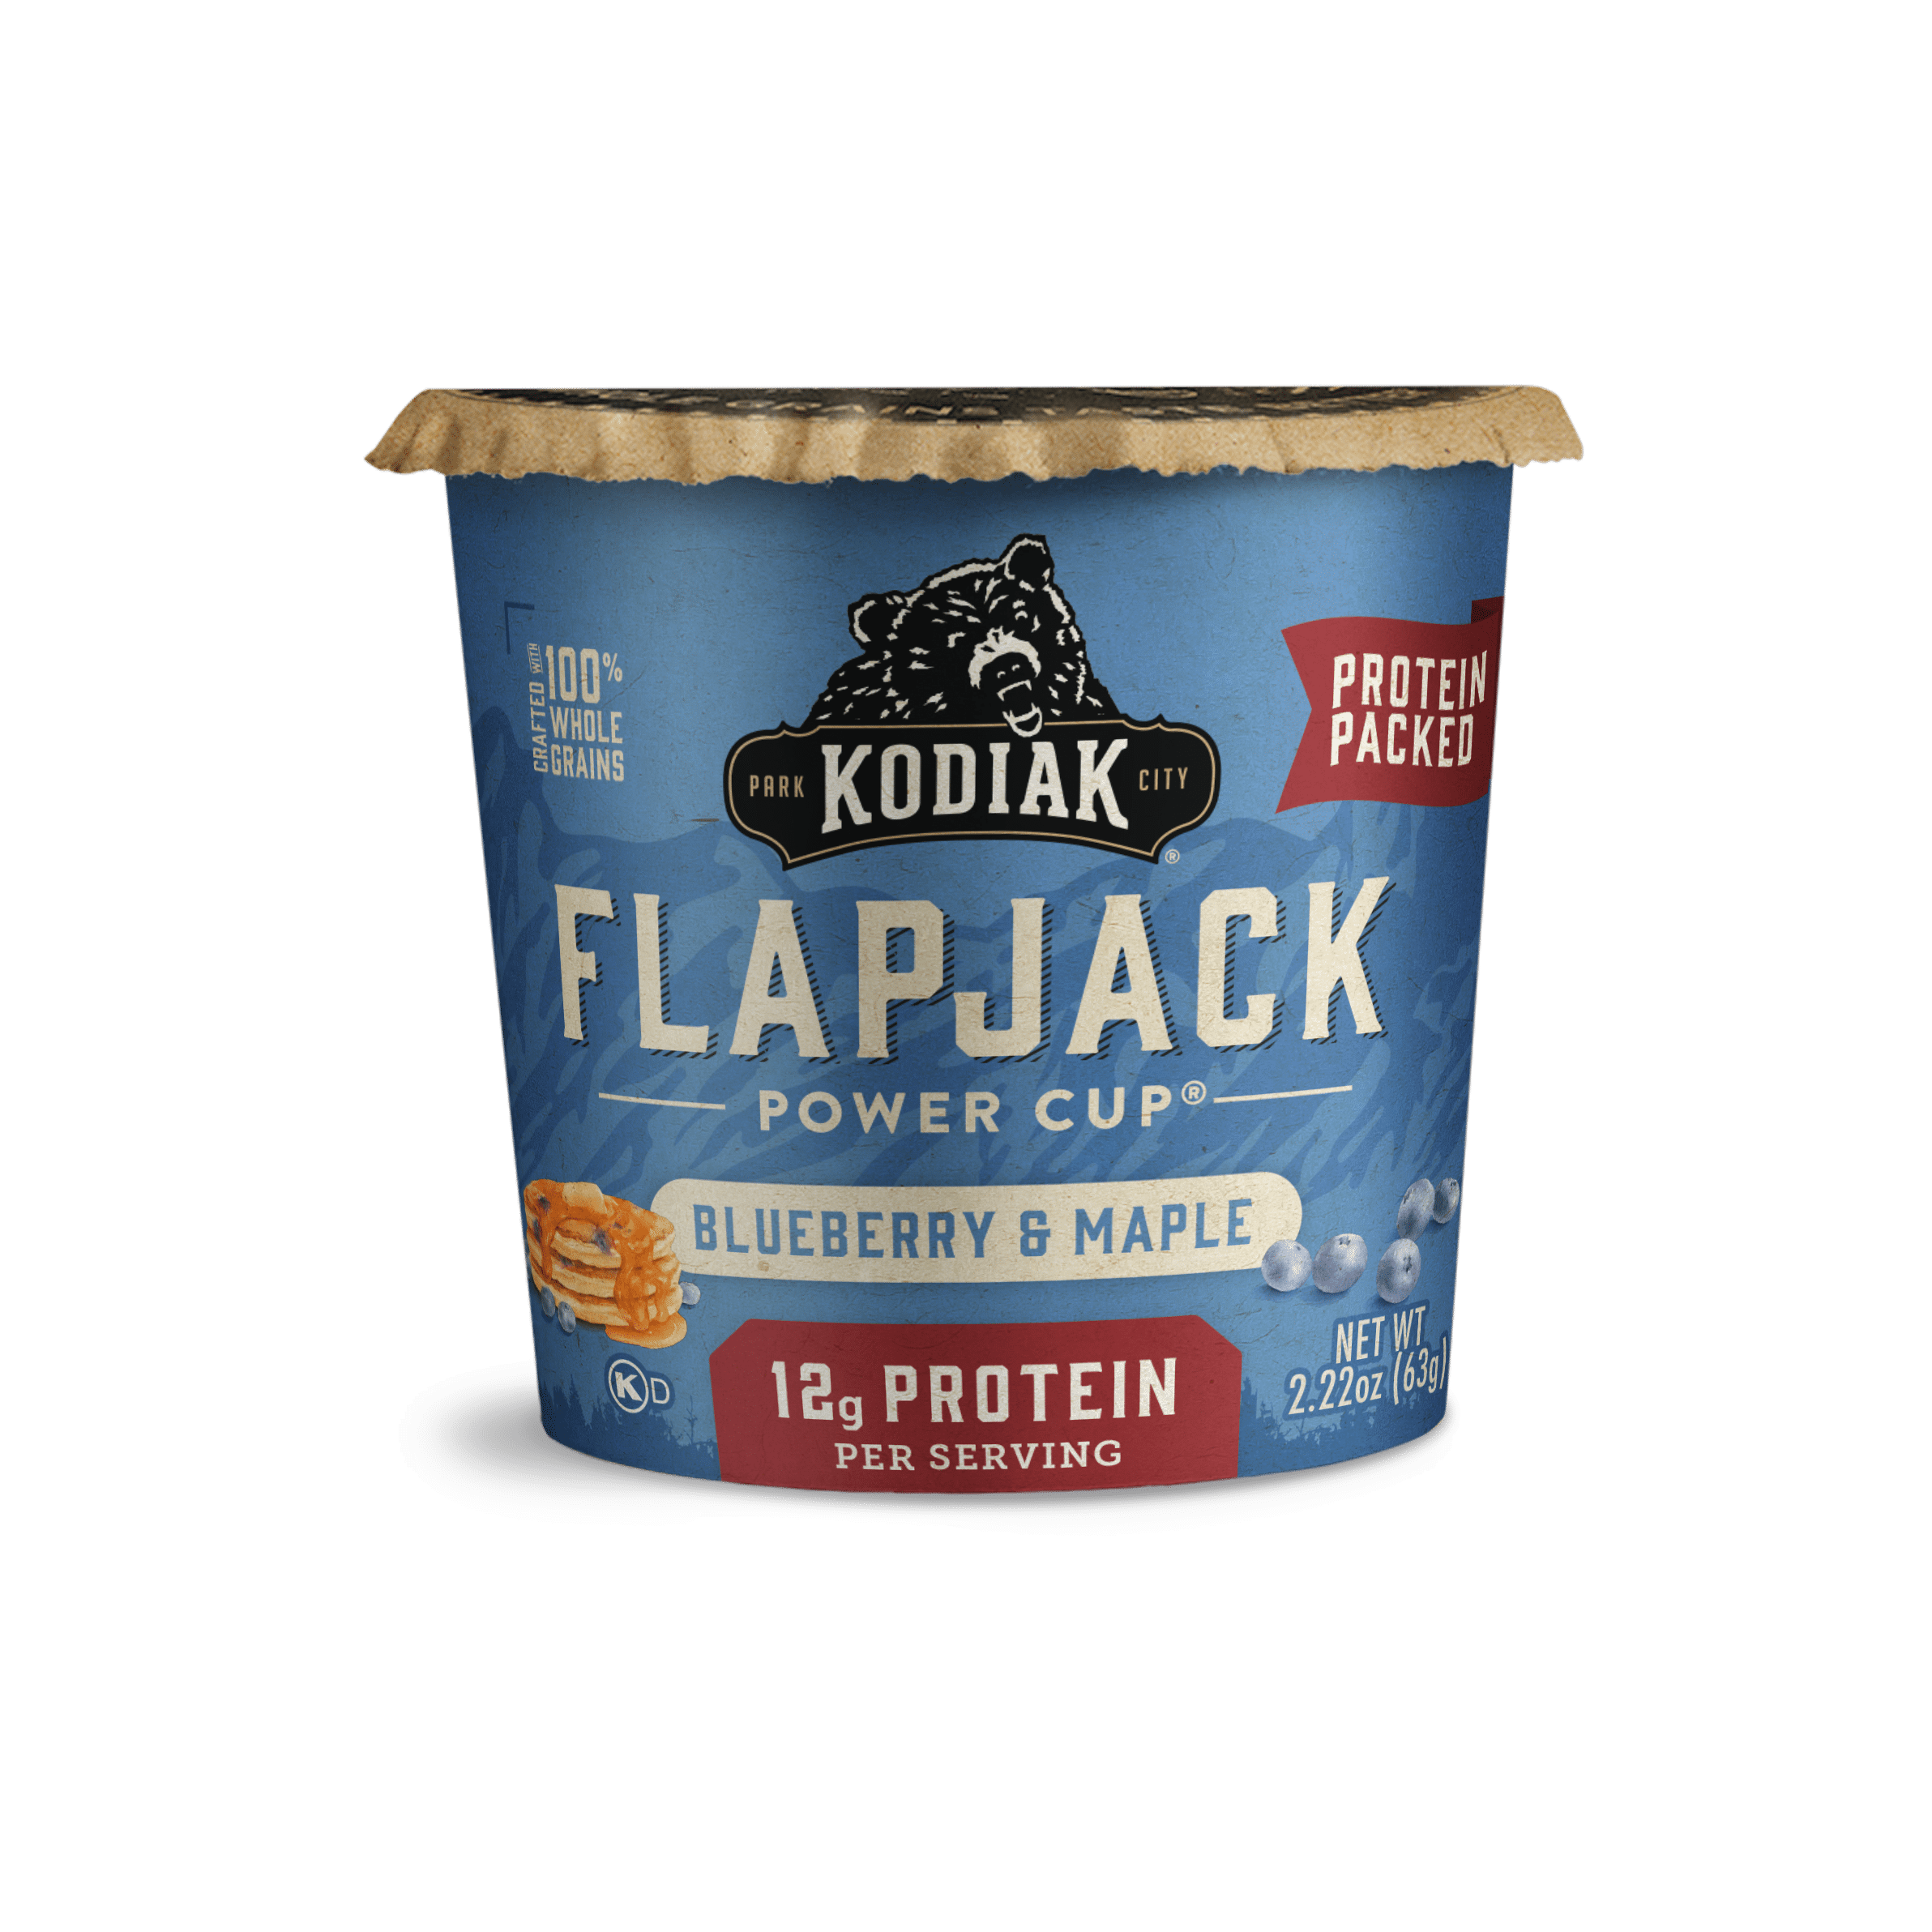 Kodiak Protein-Packed Blueberry and Maple Flapjack Power Cup, 2.22 oz